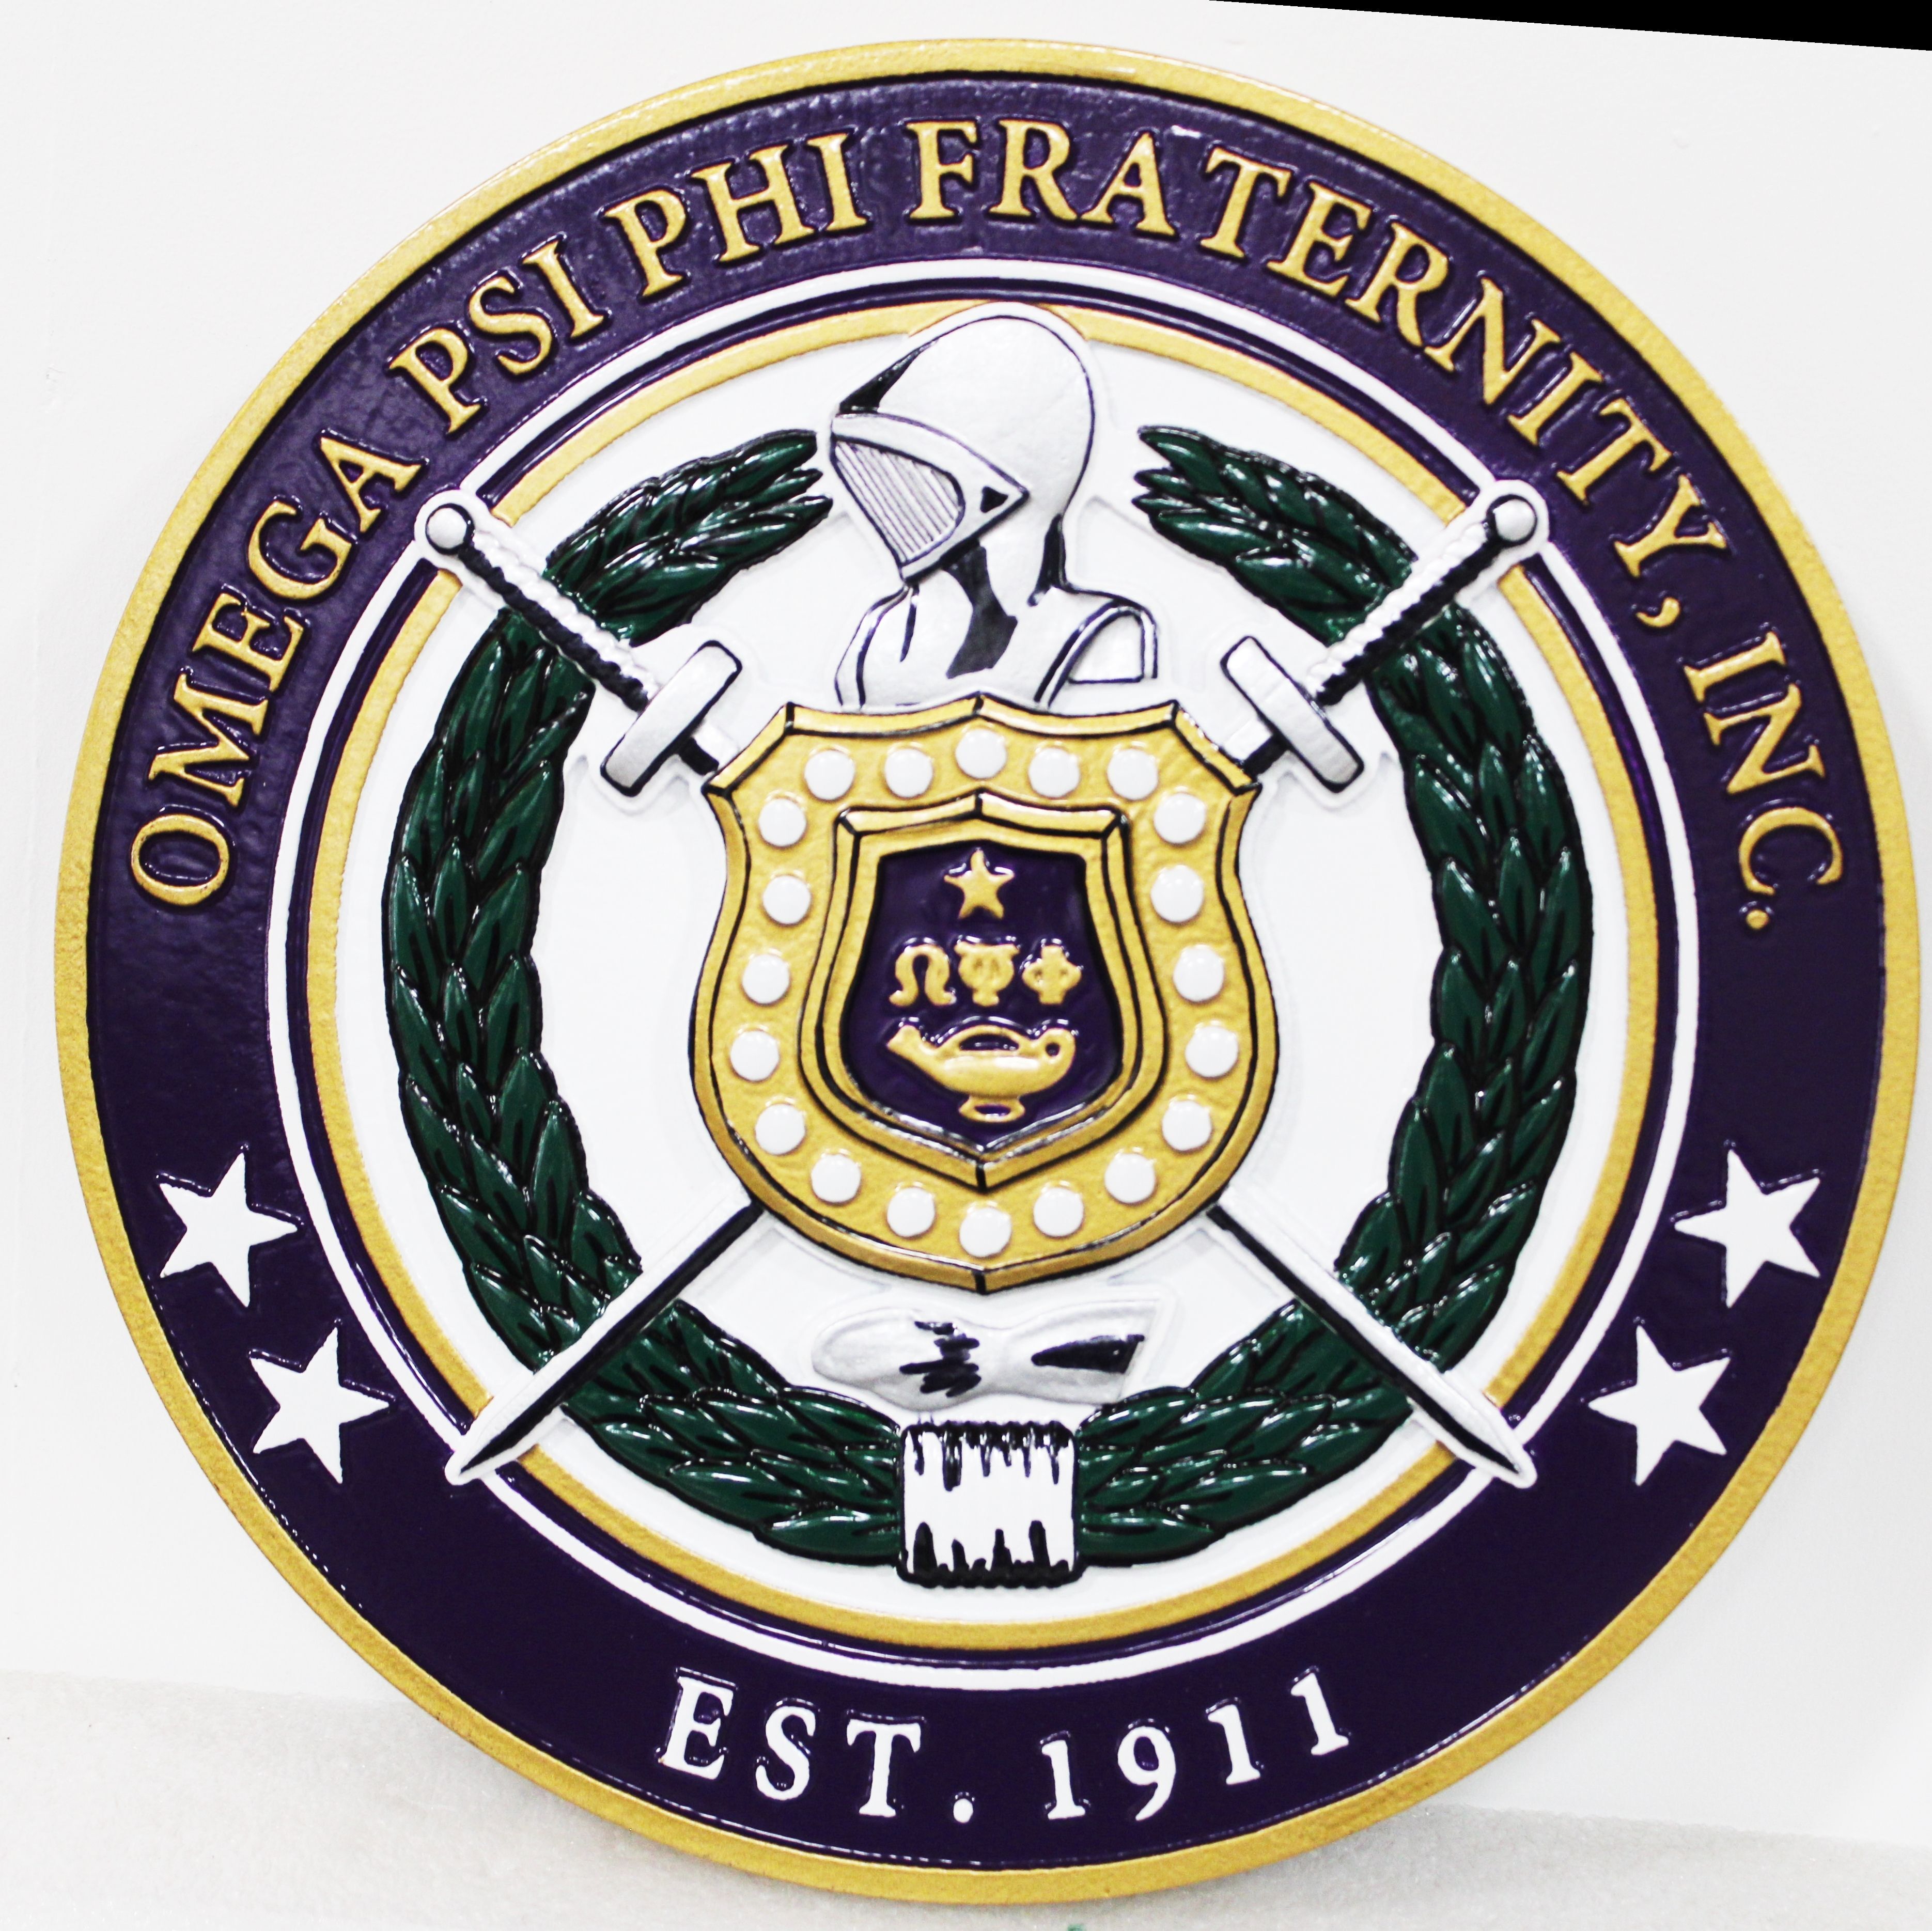 XP-3023 - Carved 2.5-D Multi-level Raised Relief Plaque of the  Coat-of-Arms for Omega Psi Phi Fraternity , with Helmet, Shield, Crossed Swords and Wreath